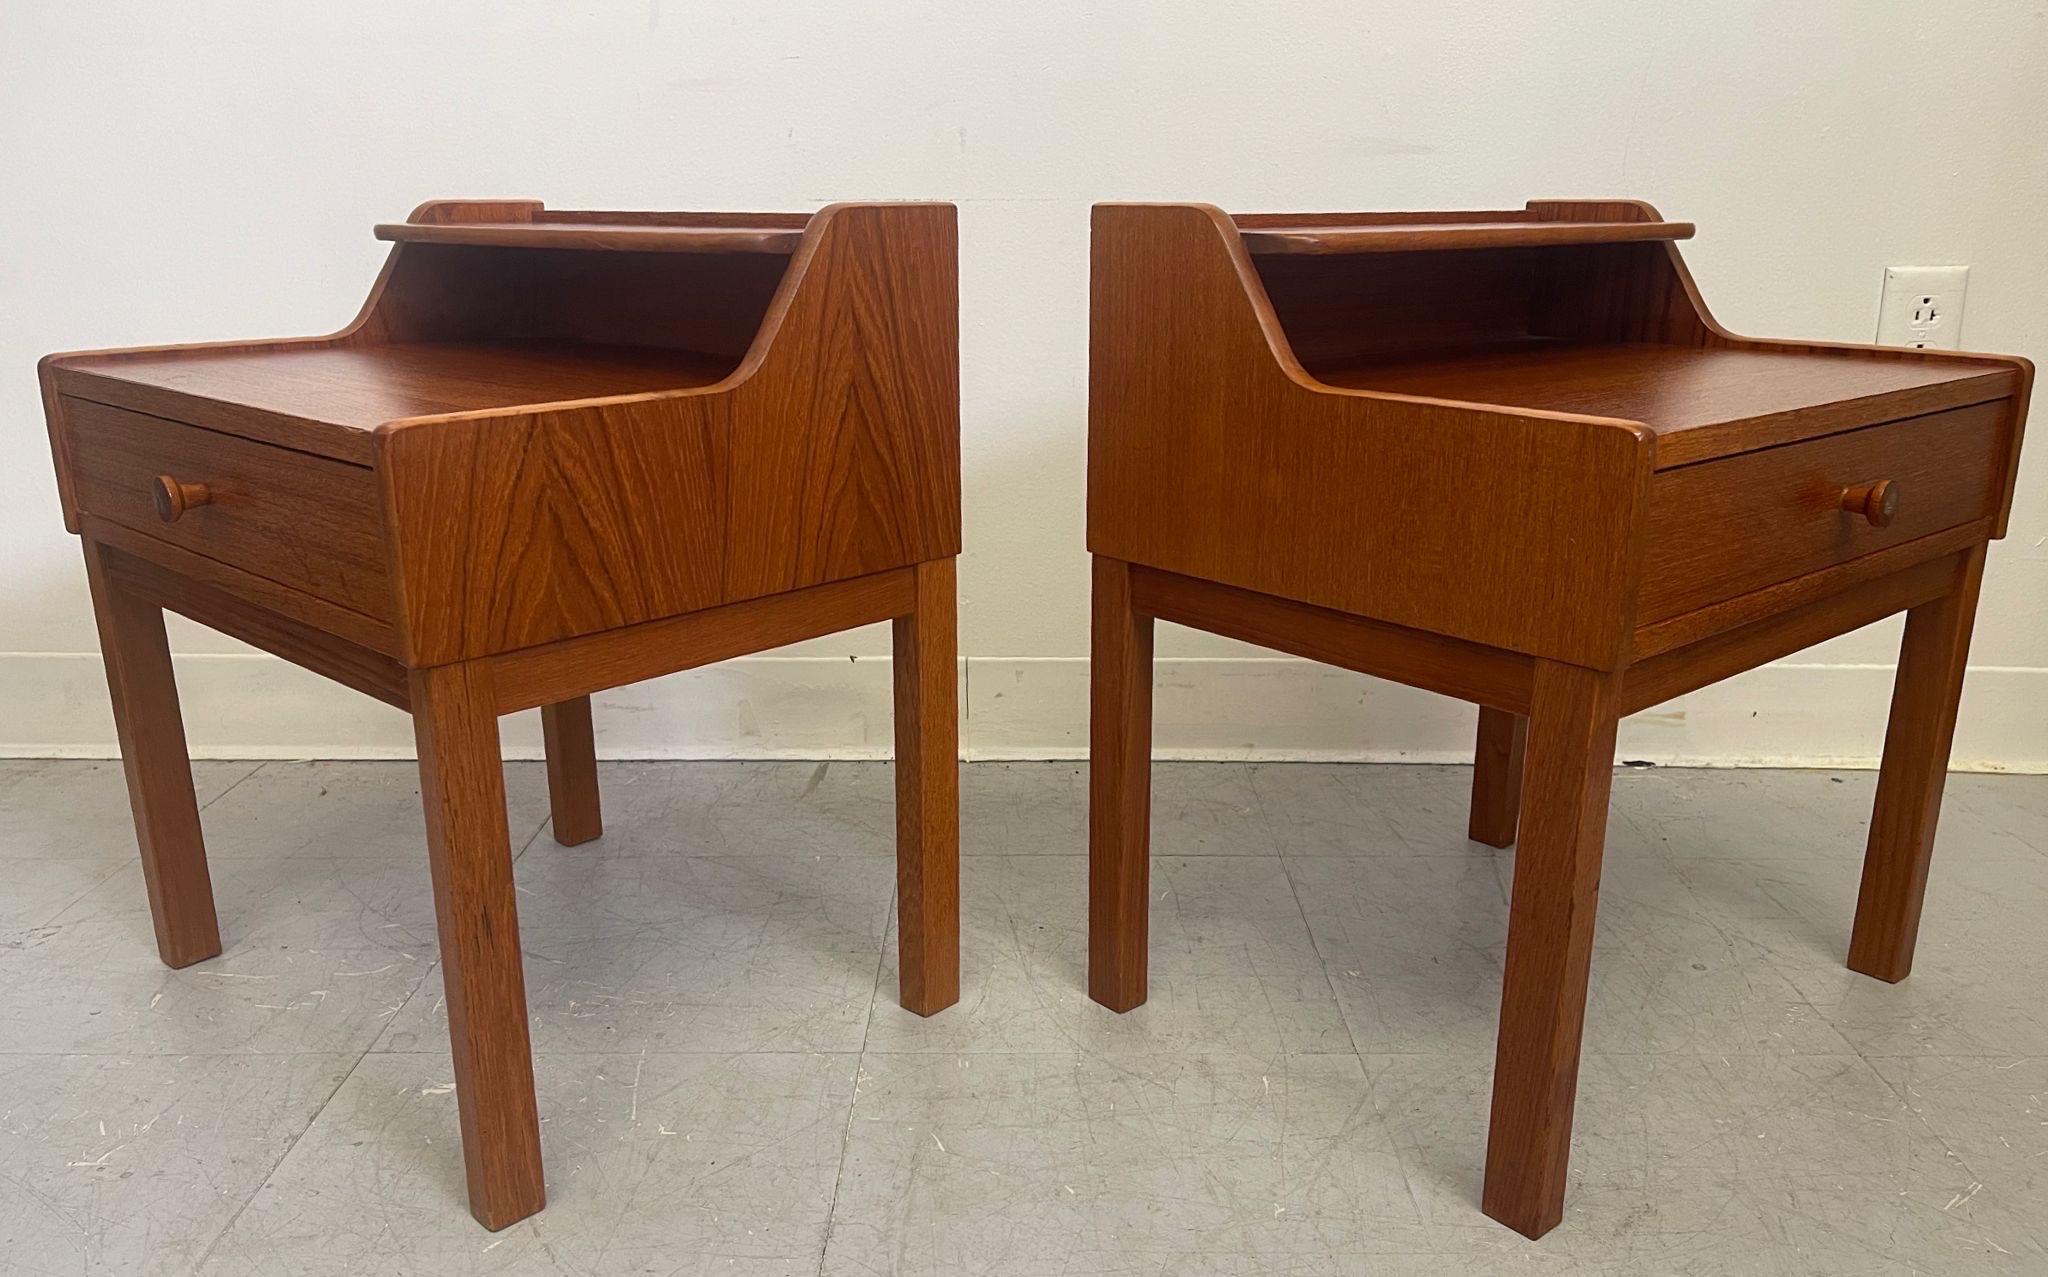 This pair of end tables features open shelf compartment above a single drawer featuring wooden handles. Circa 1970s. No Makers mark. Vintage Condition Consistent with Age as Pictured.

Dimensions. 18 W ; 13 3/4 D ; 19 1/2 H